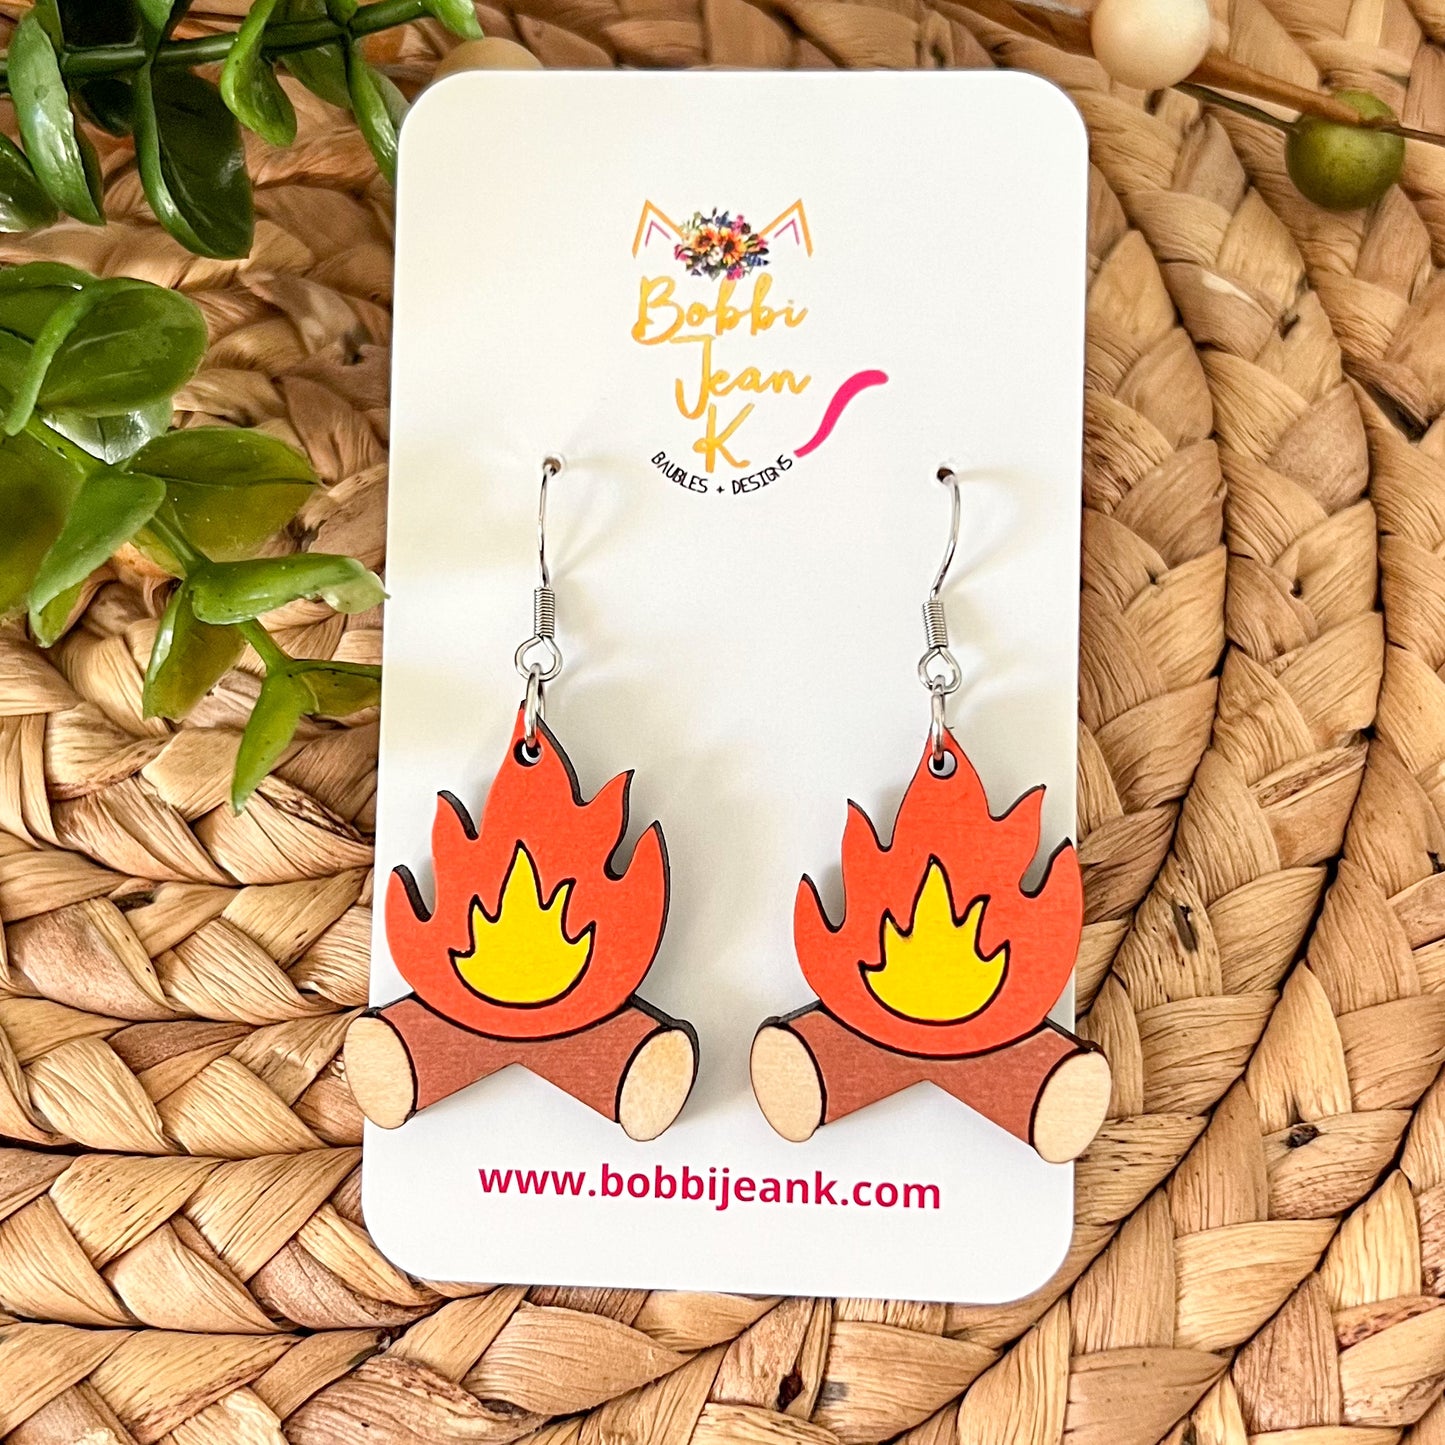 Bonfire/Campfire Hand Painted Wood Earrings: Choose From Dangle or Stud Style